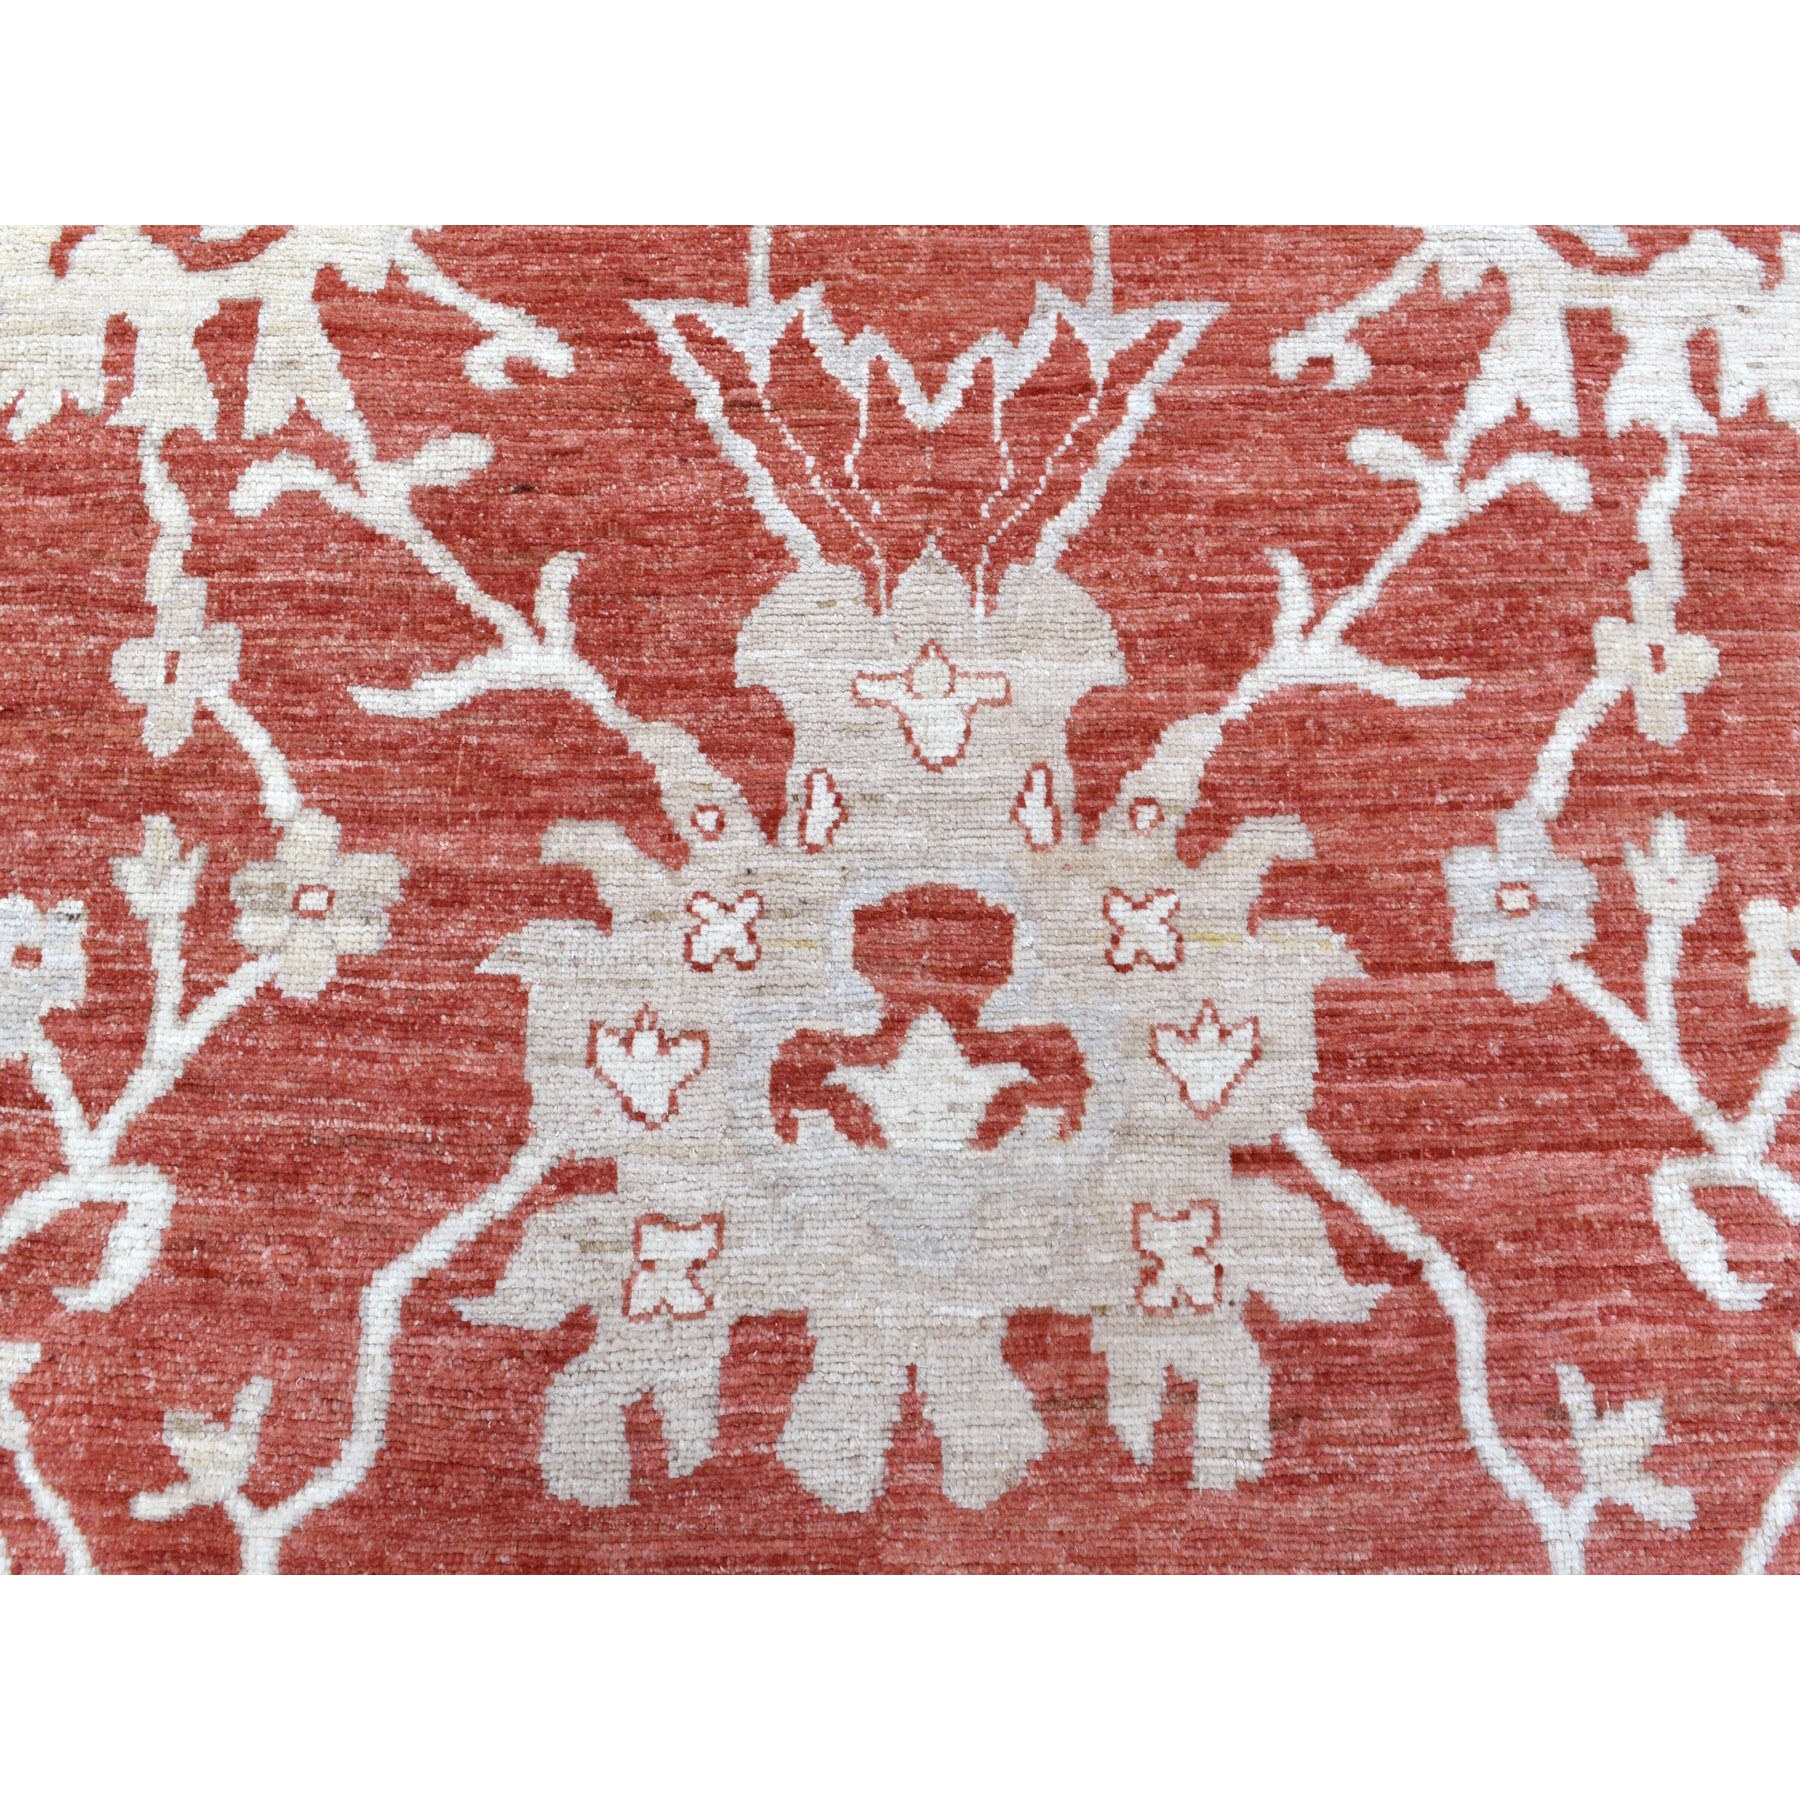 11'9"x14'9" Angora Oushak with Floral All Over Design Hand Woven Brick Red Soft Afghan Wool Oriental Oversized Rug 